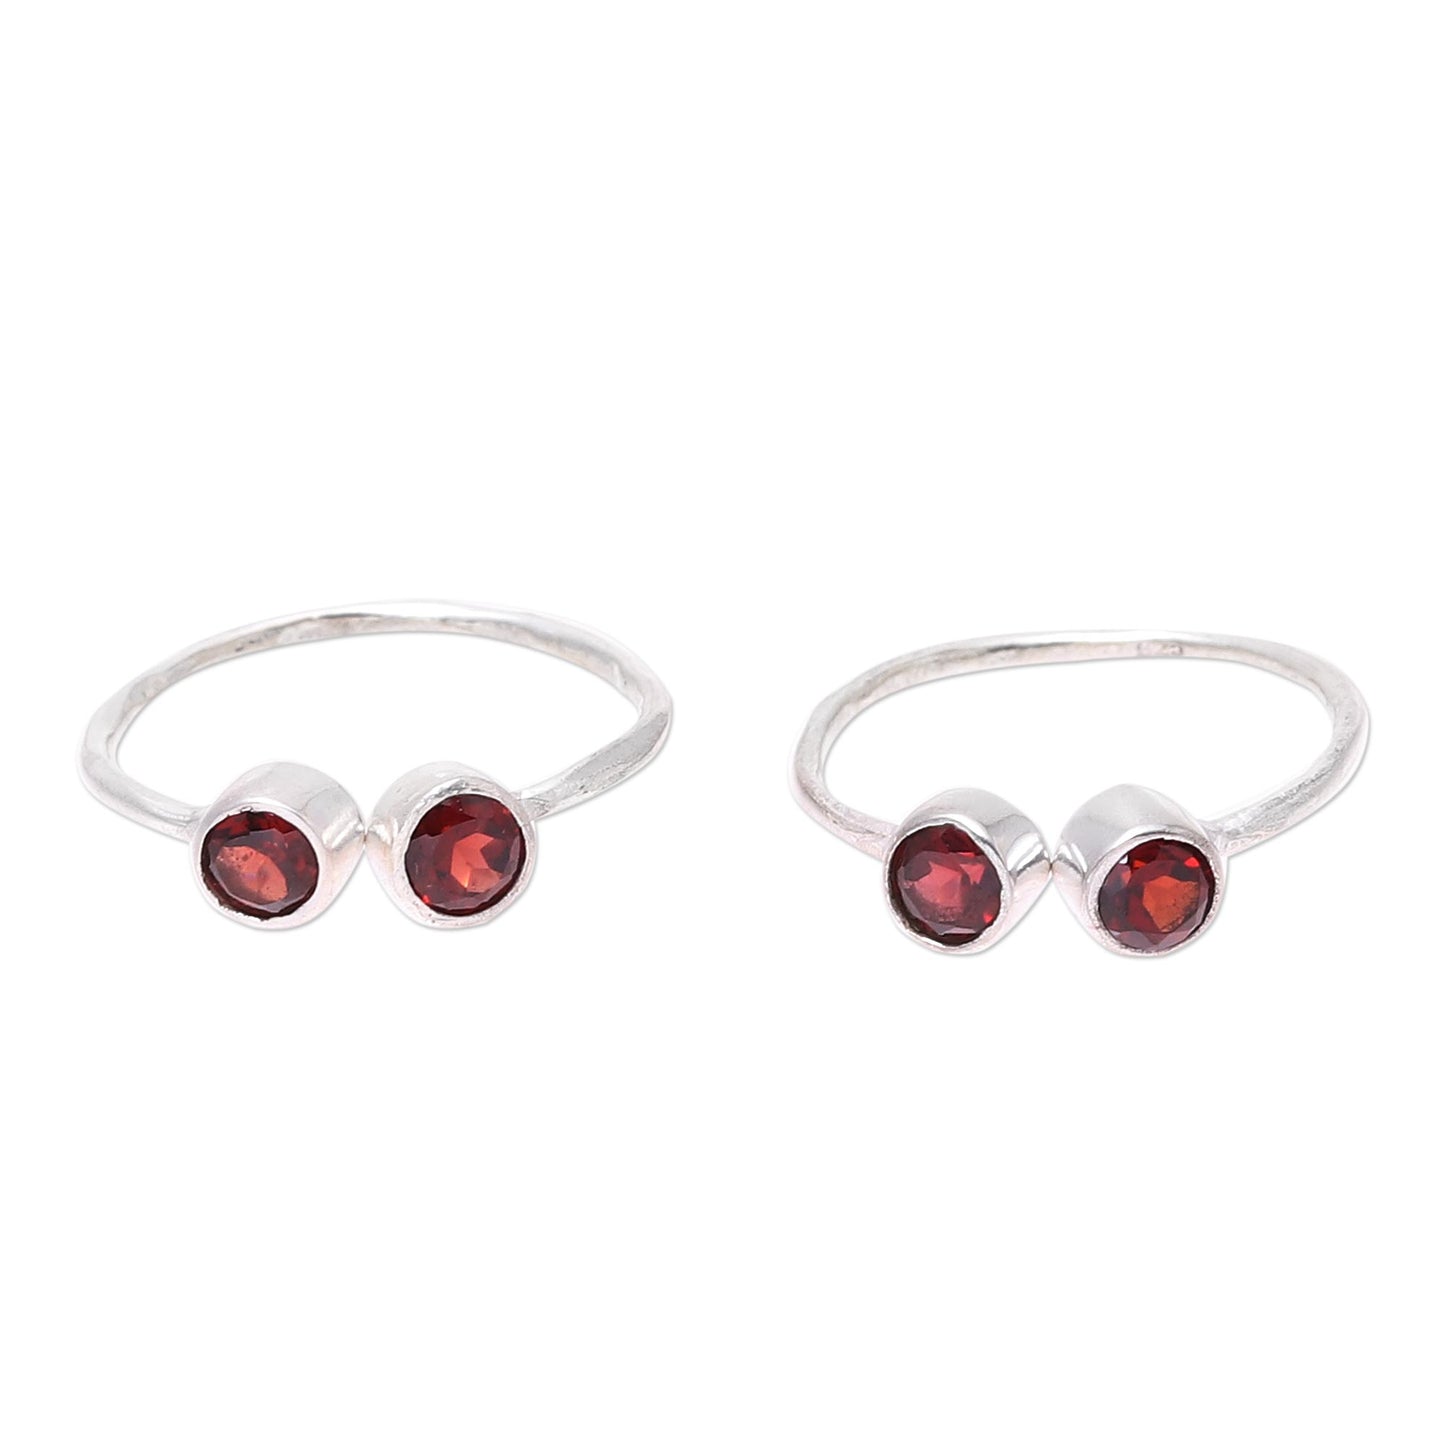 Twin Elegance Sparkling Garnet Toe Rings Crafted in India (Pair)